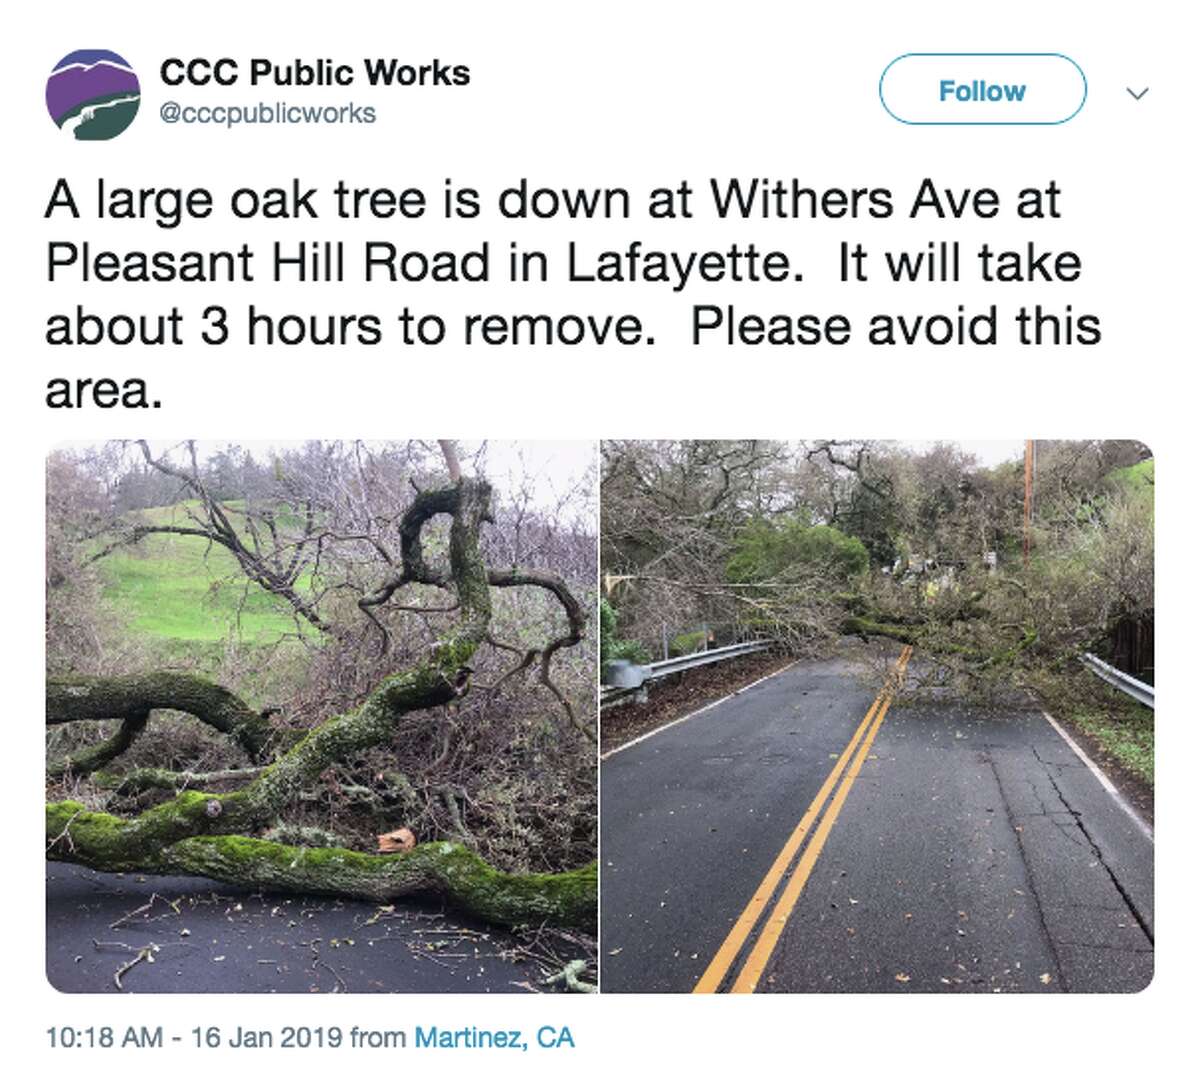 CCC Public works tweeted photos of an oak tree down at Withers Ave at Pleasant Hill Road in Lafayette on Jan. 16, 2019. The area should be avoided.